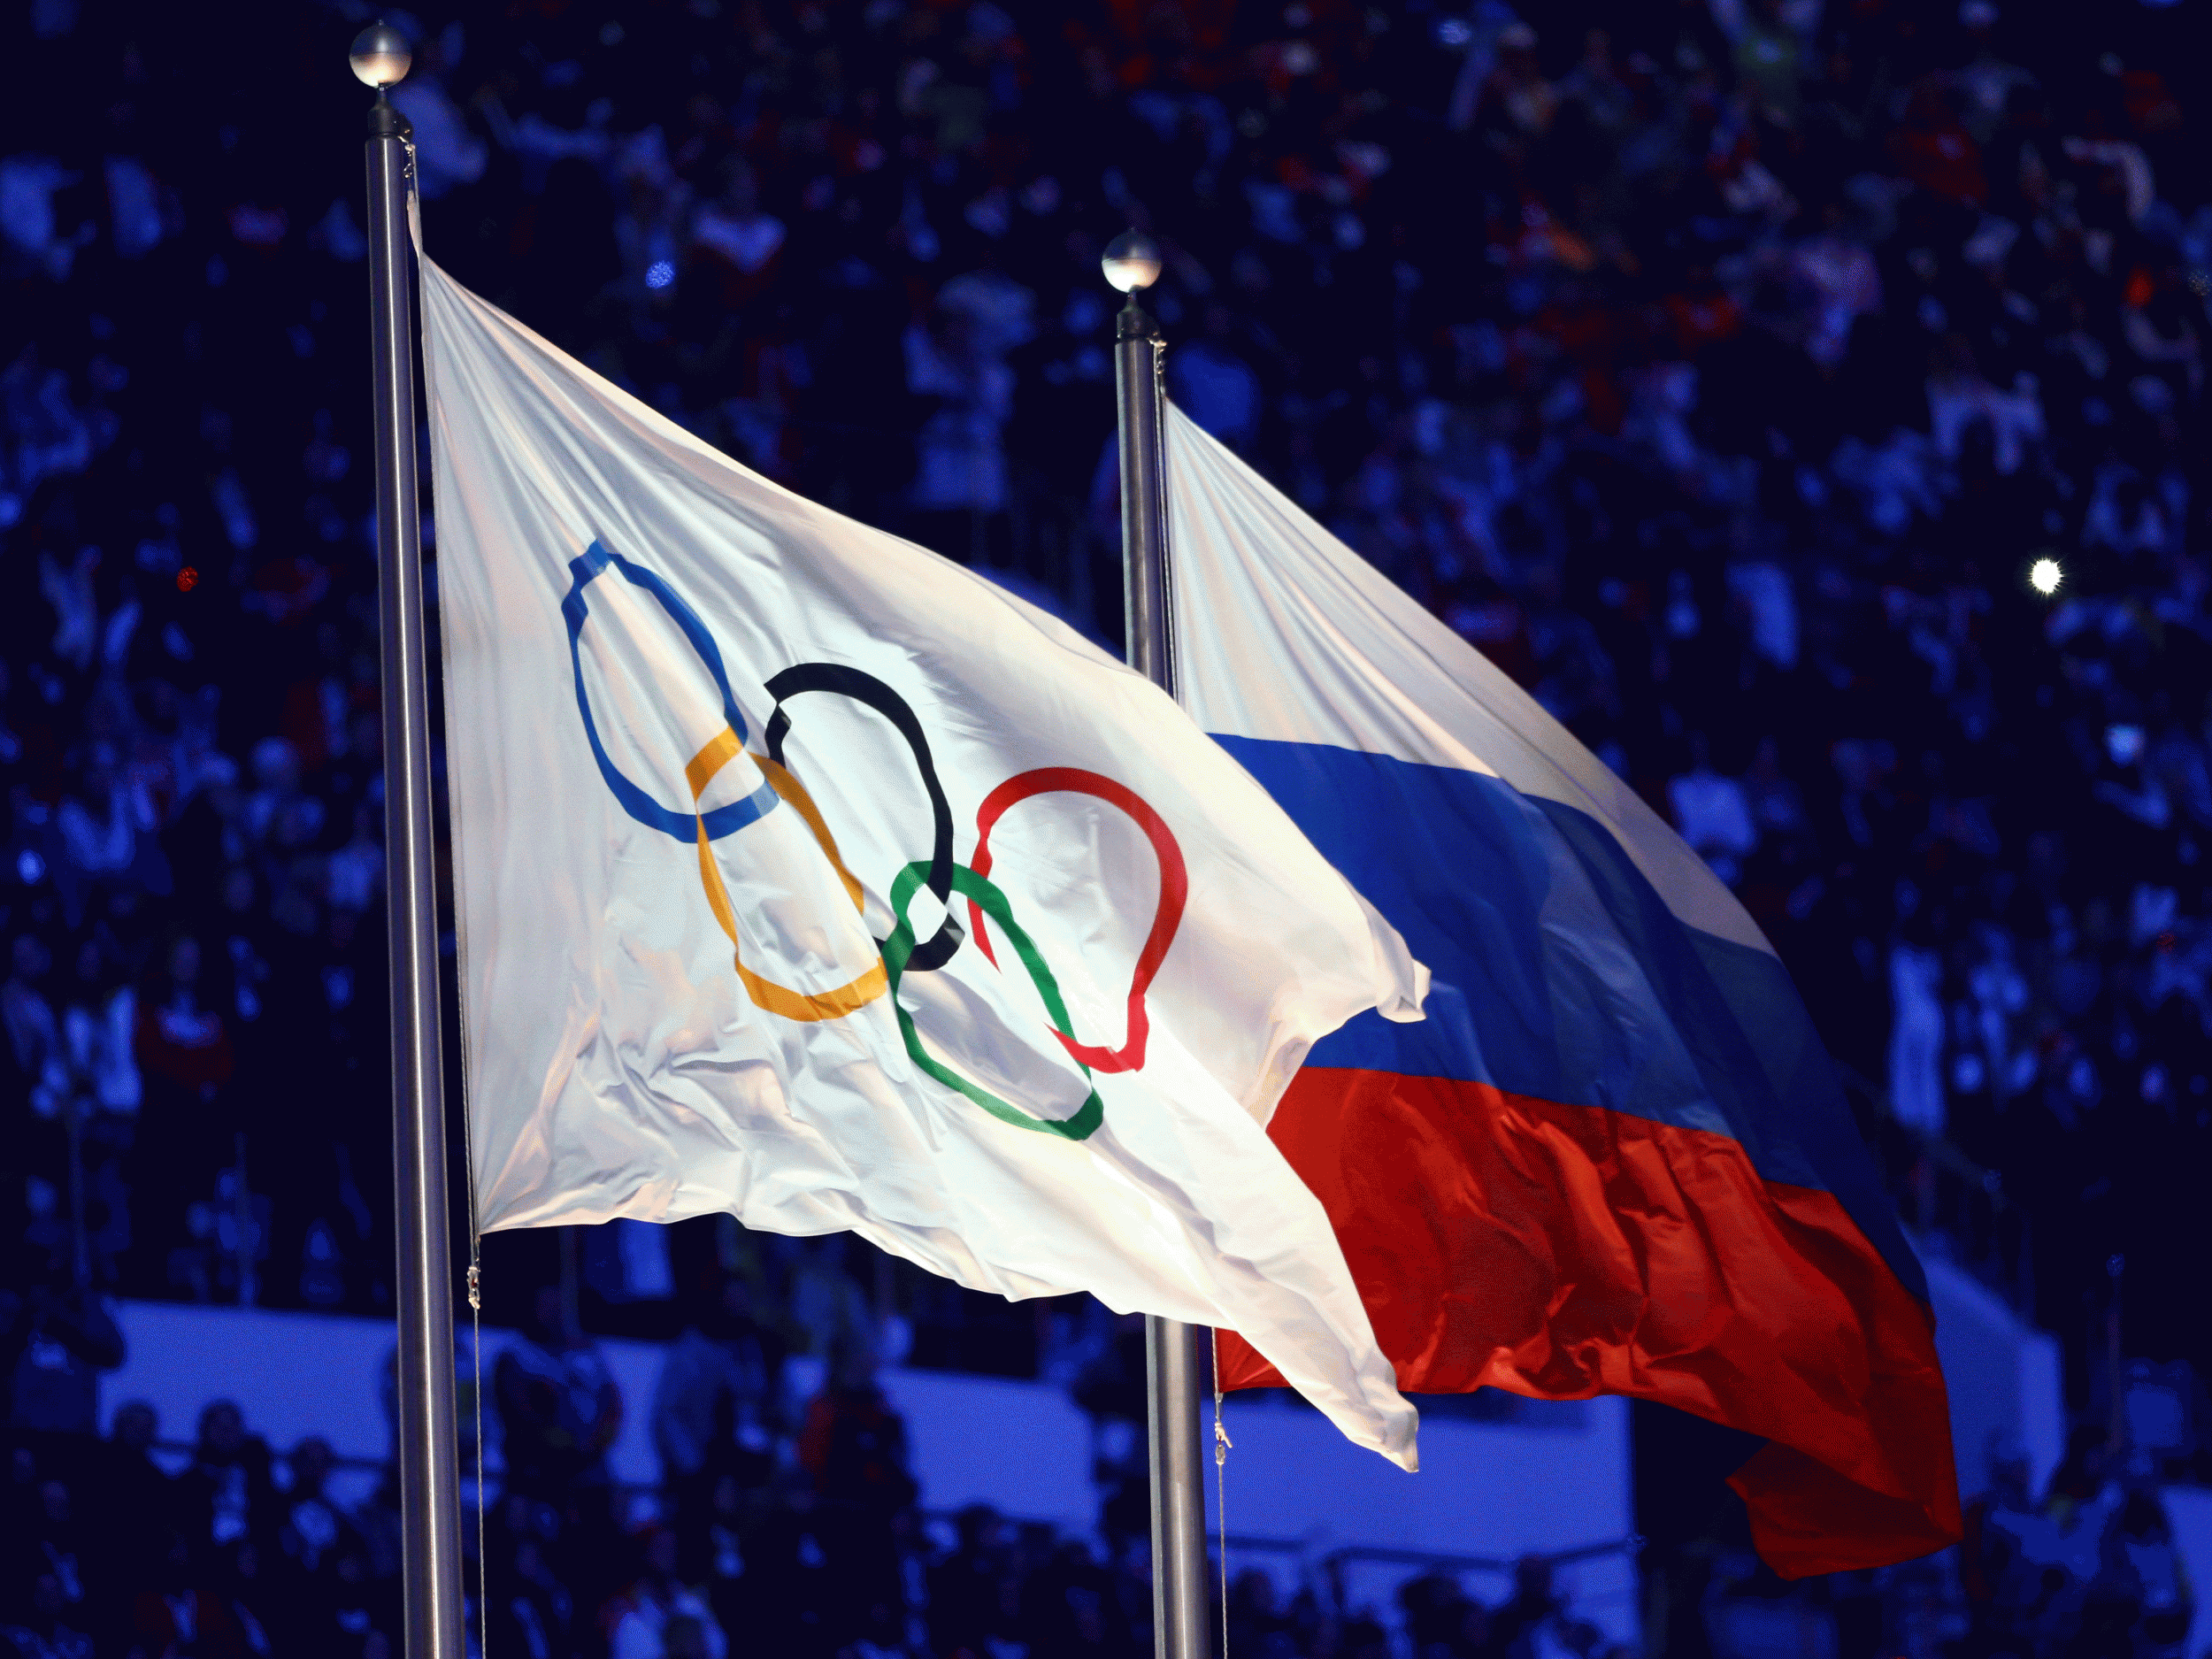 The Olympic and Russian flags fly side-by-side at the 2014 Sochi Winter Olympic Games